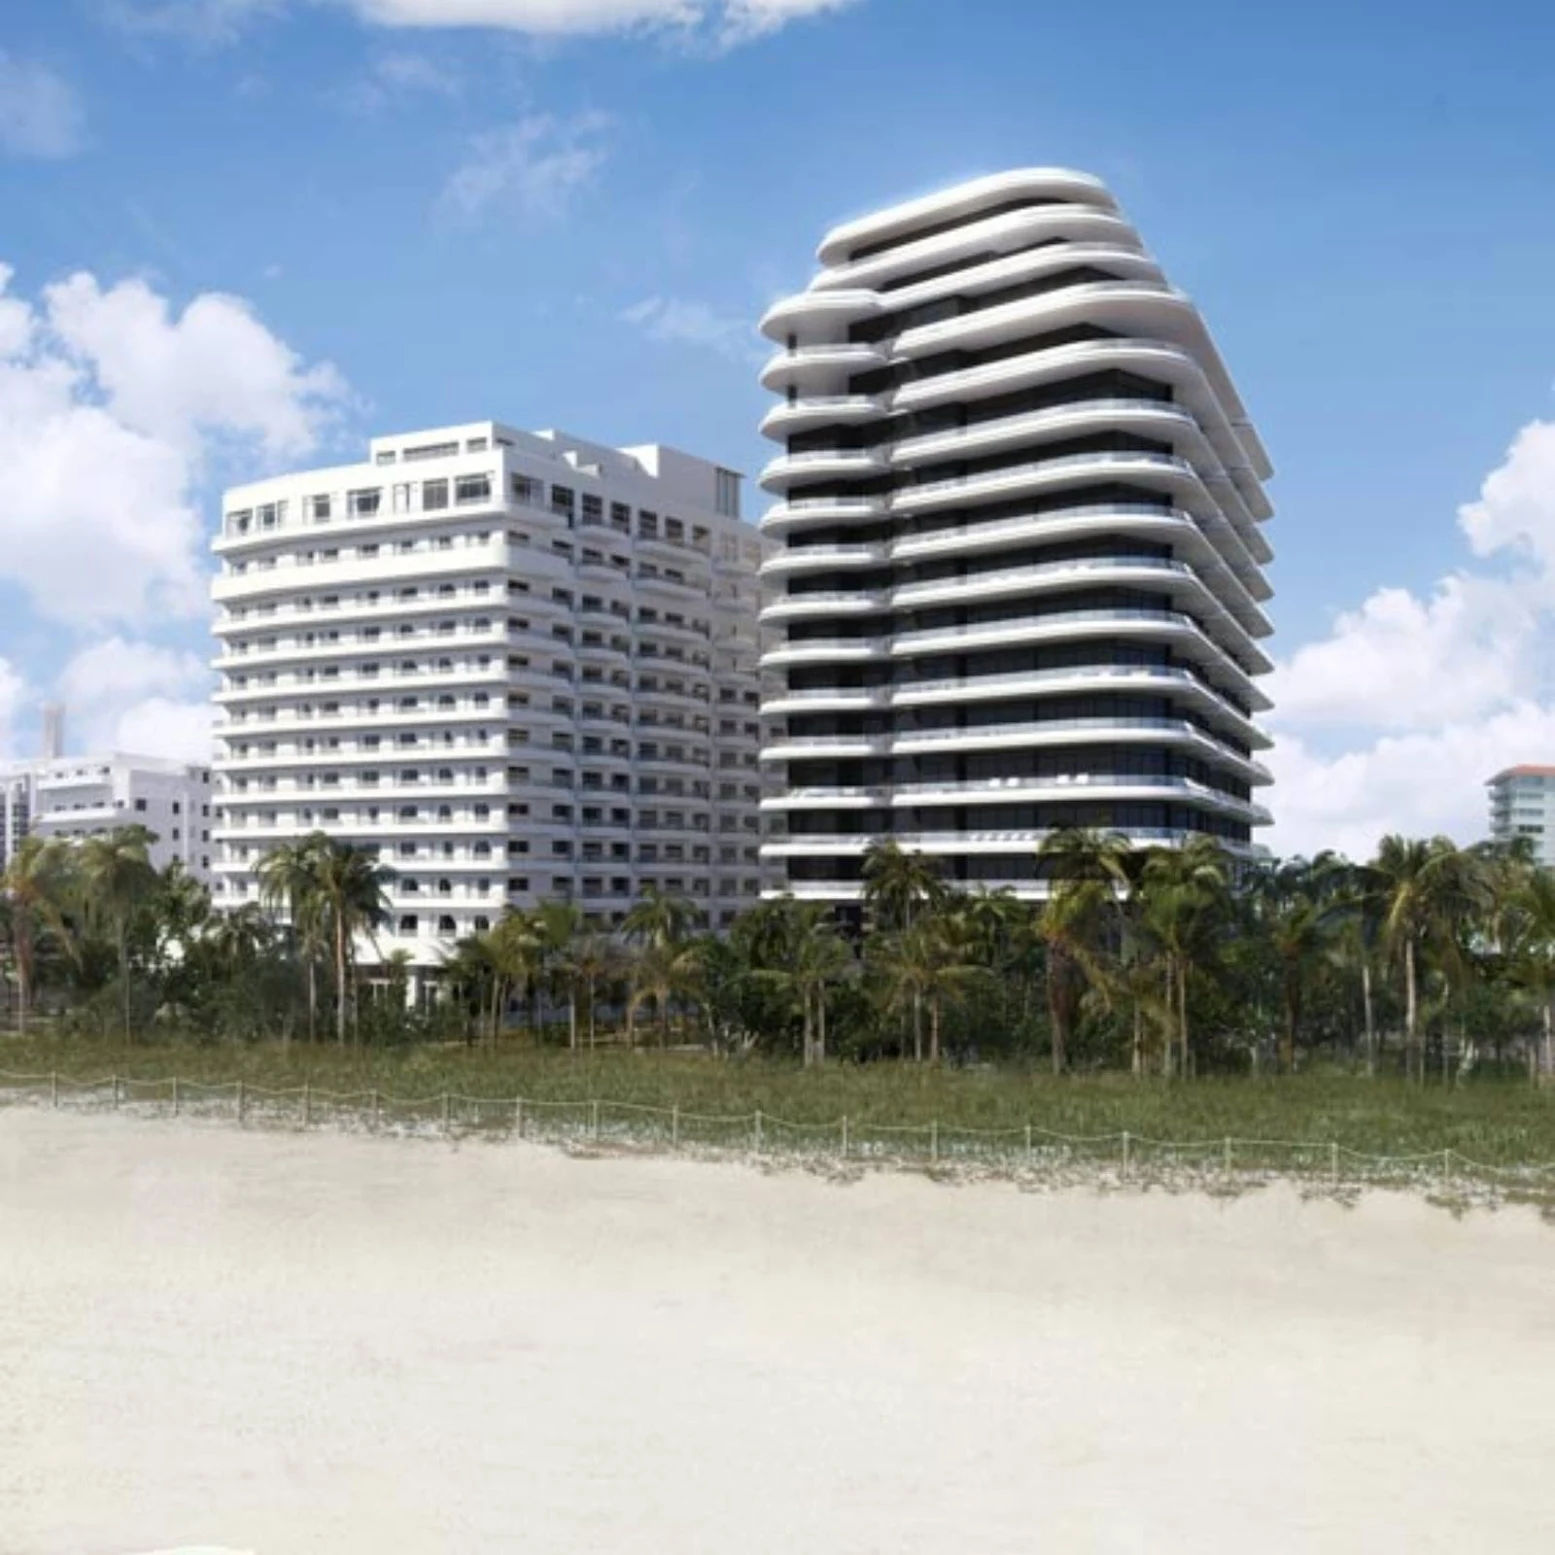 Faena House by Foster Partners